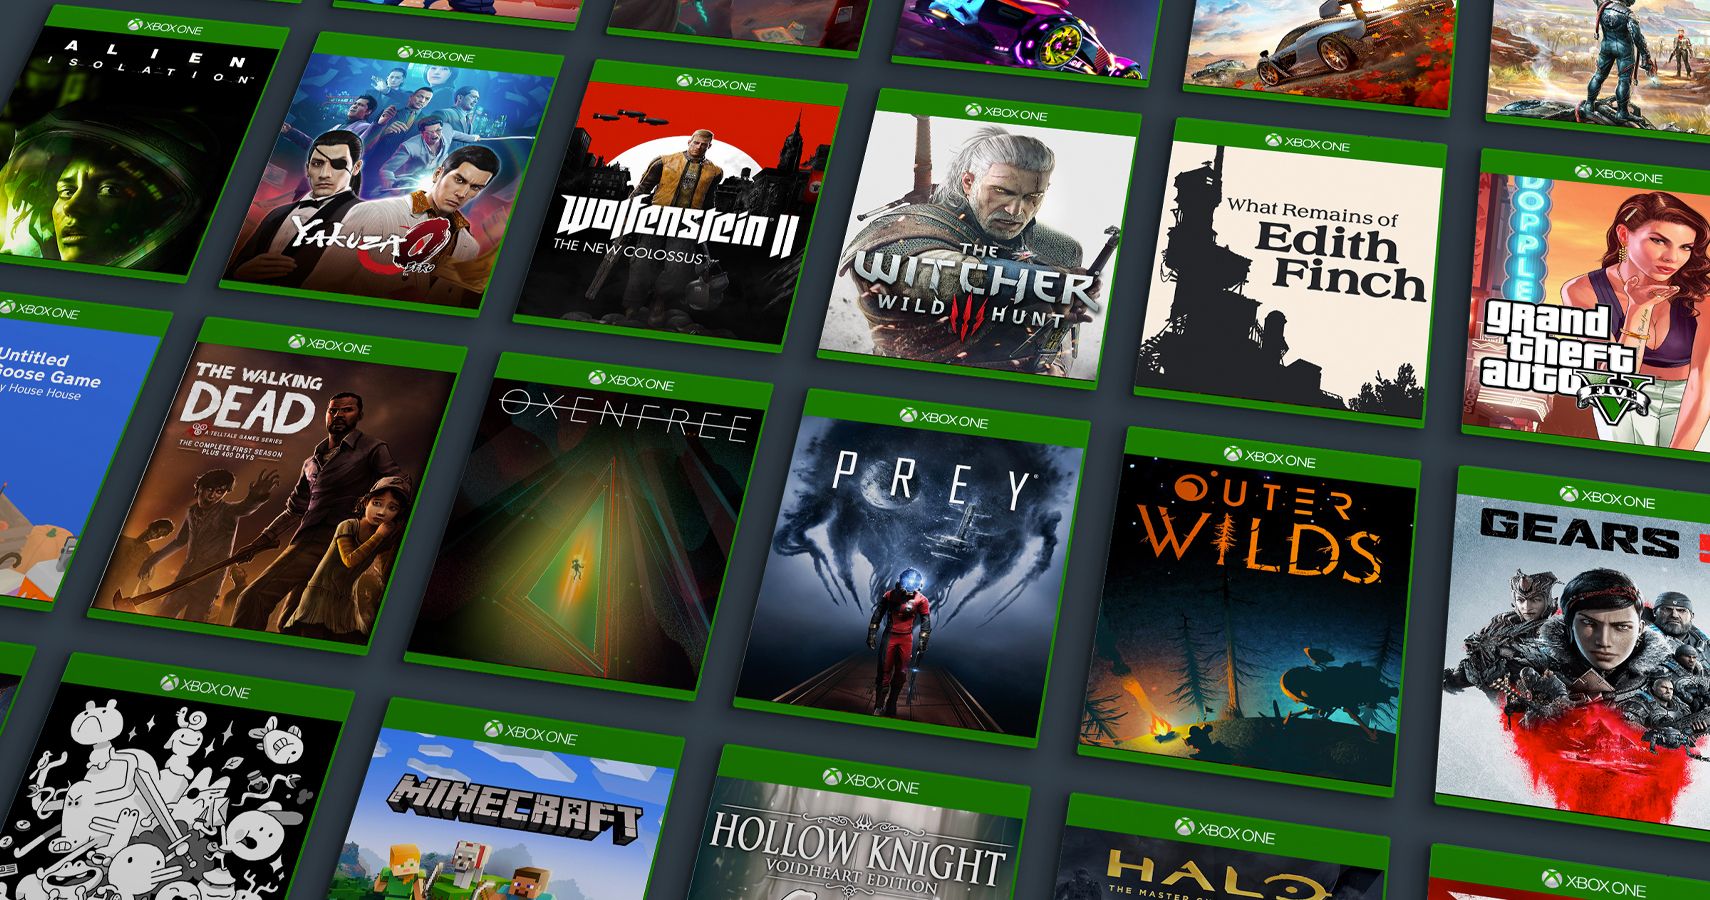 There's No Excuse For Game Pass Games Launching Without PC Crossplay